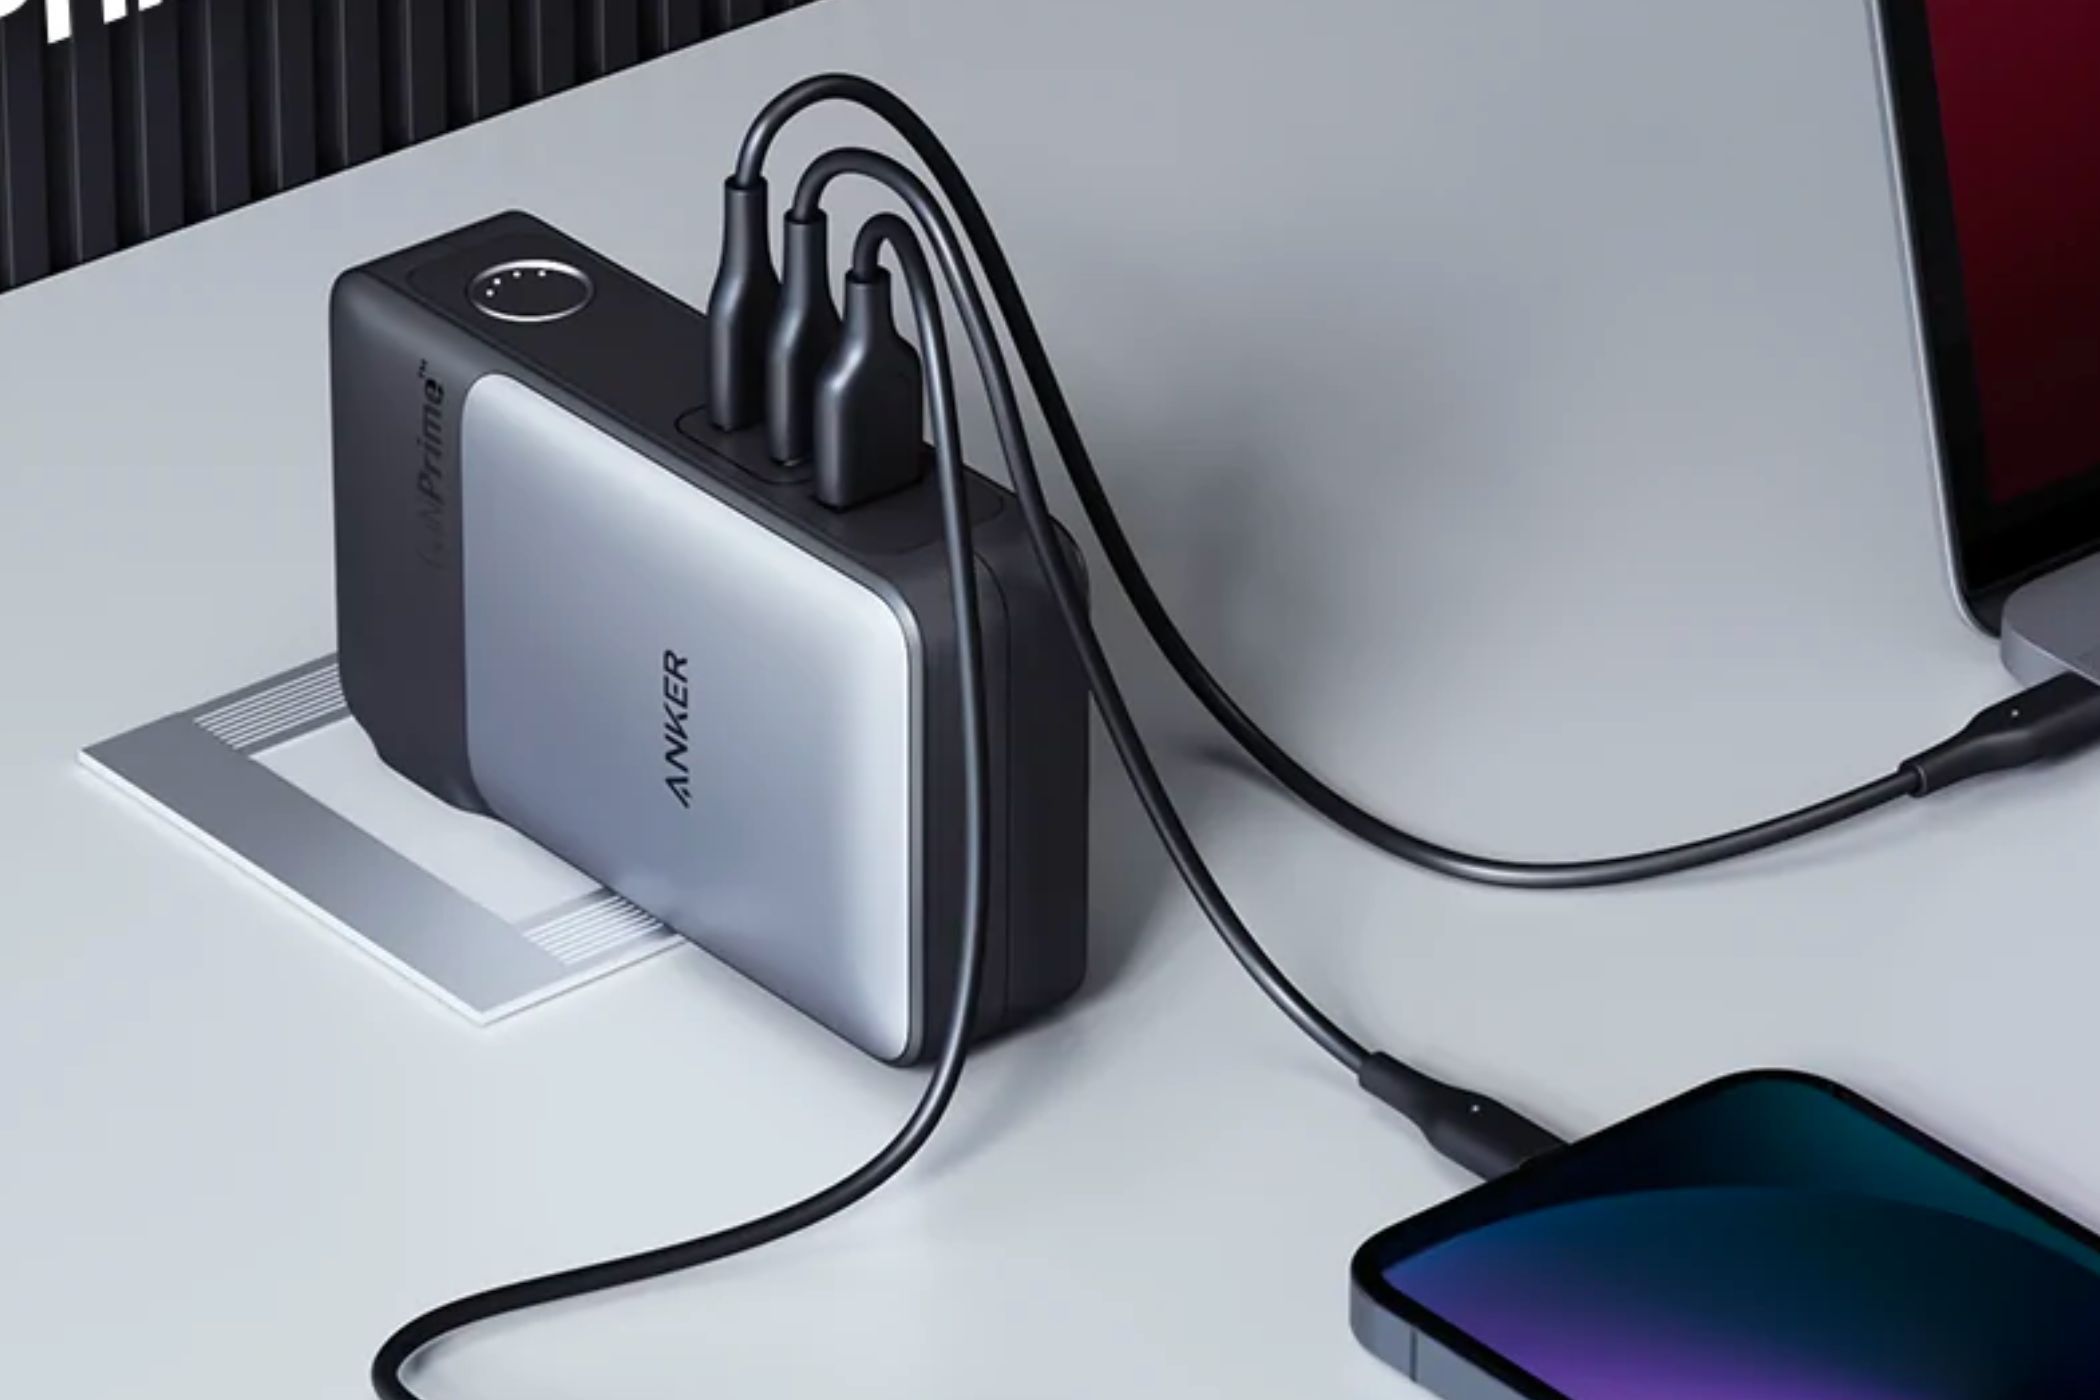 An image showing the Anker 733 power bank connected to an AC outlet on a white-colored table with multiple USB cables charging different devices.